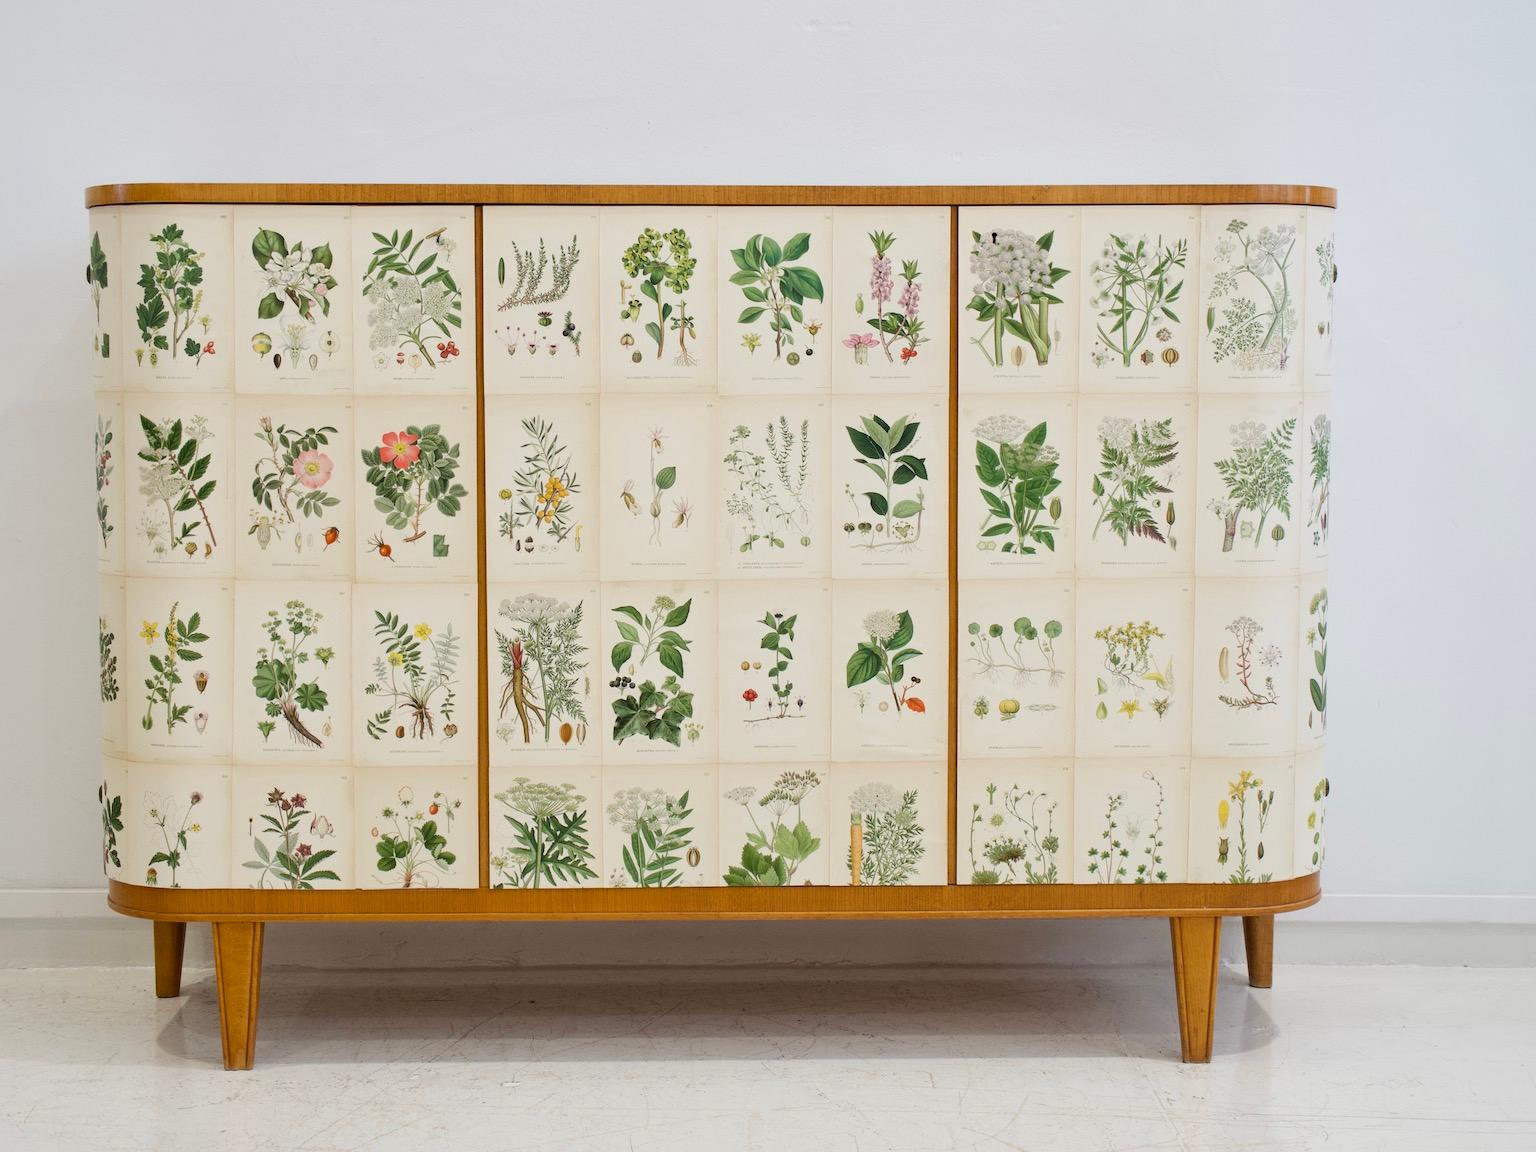 Swedish elm veneered cabinet from the 1940s, later decorated with printed paper. The flower illustrations are from the book 